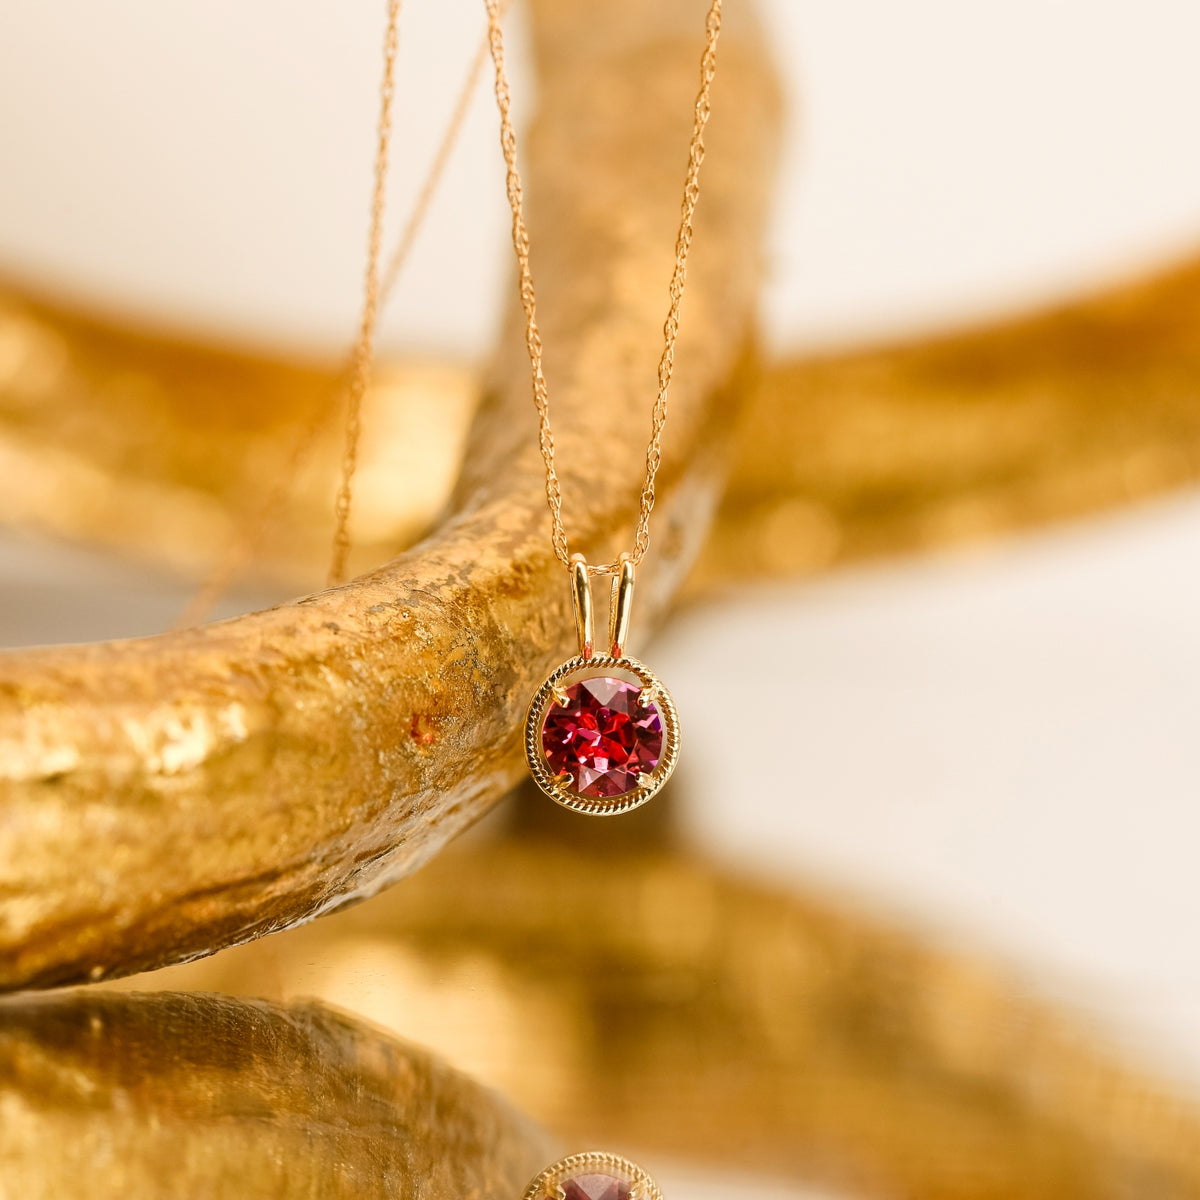 10K Gold Birthstone Solitaire Necklace